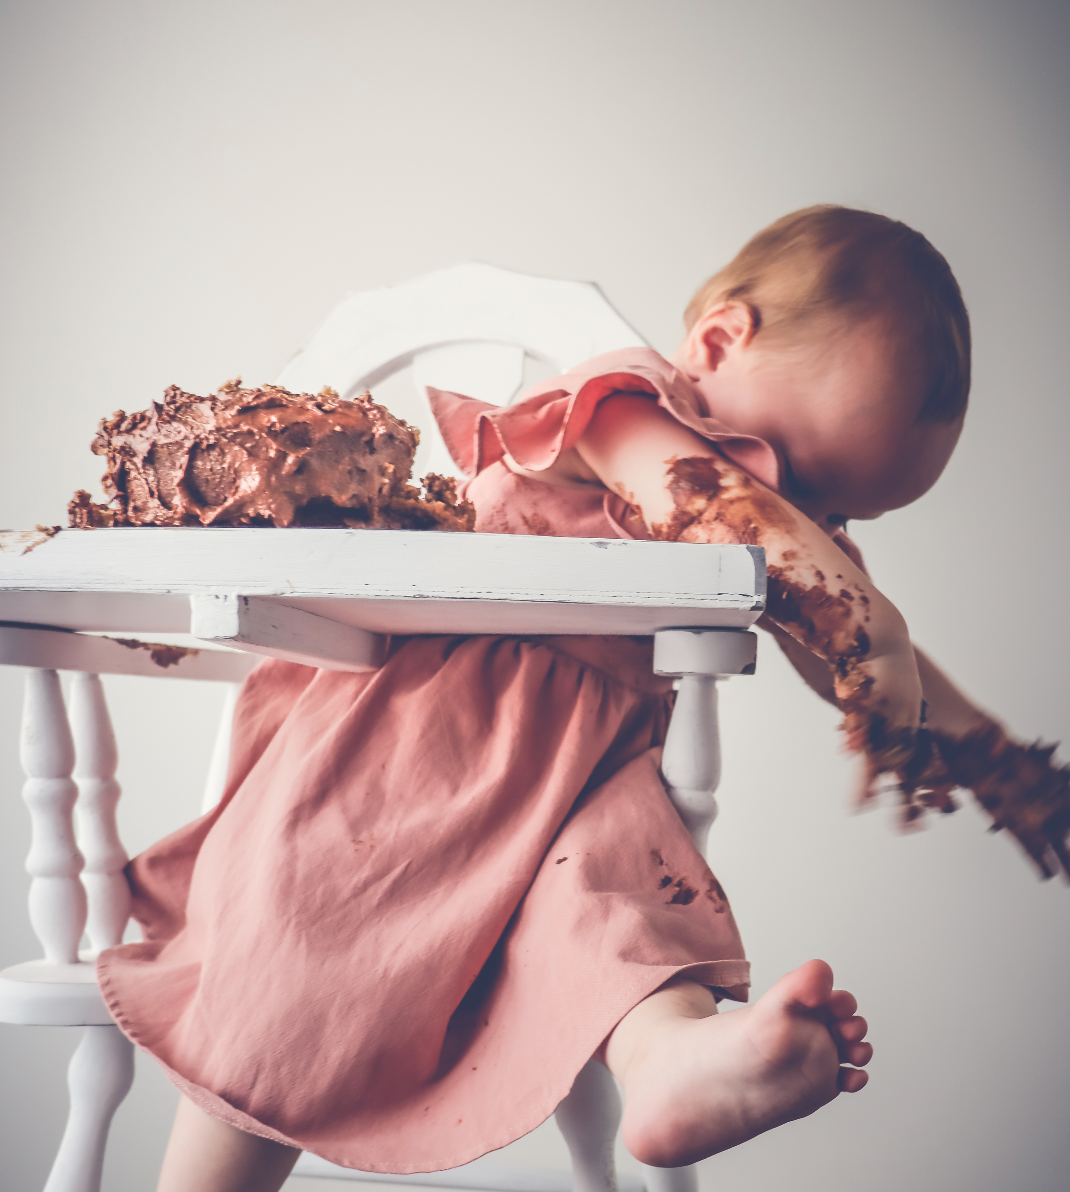 A baby in a high chair smashing a cake